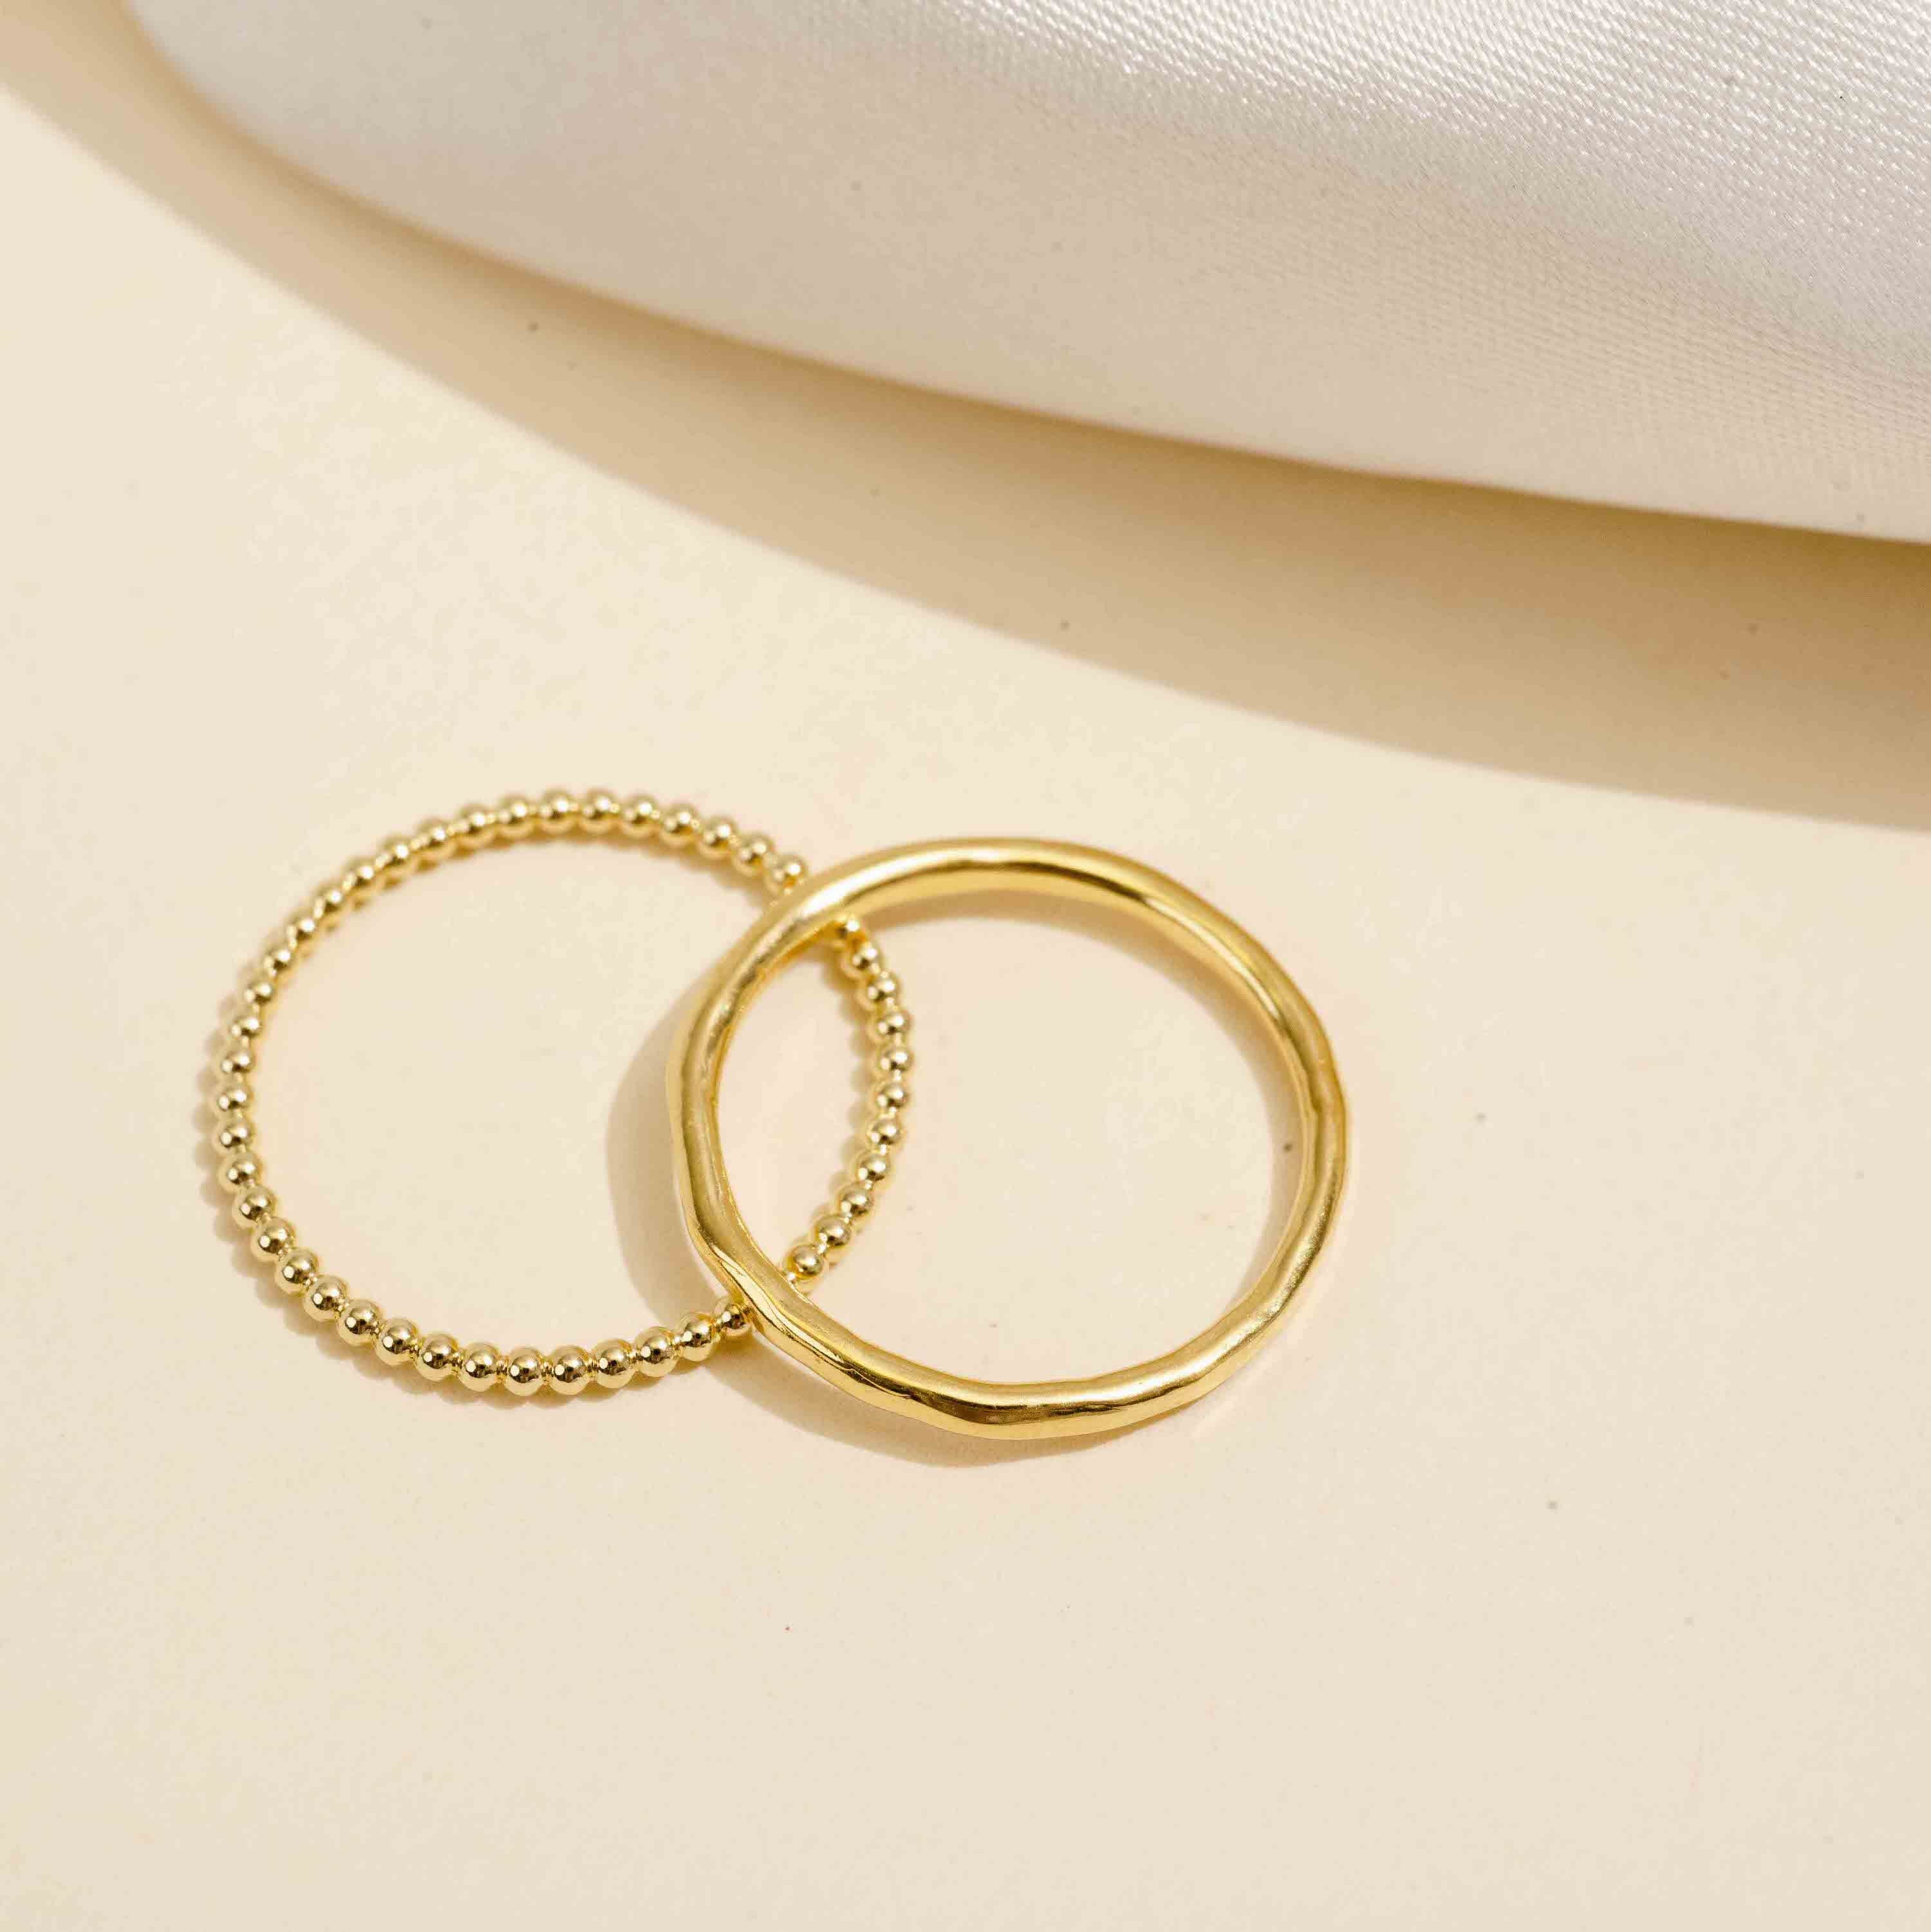 A How-To guide on elevating your everyday style with minimalist jewelry featuring the dainty gold Beaded and Hammered Band stacking ring made in America by Katie Dean Jewelry.